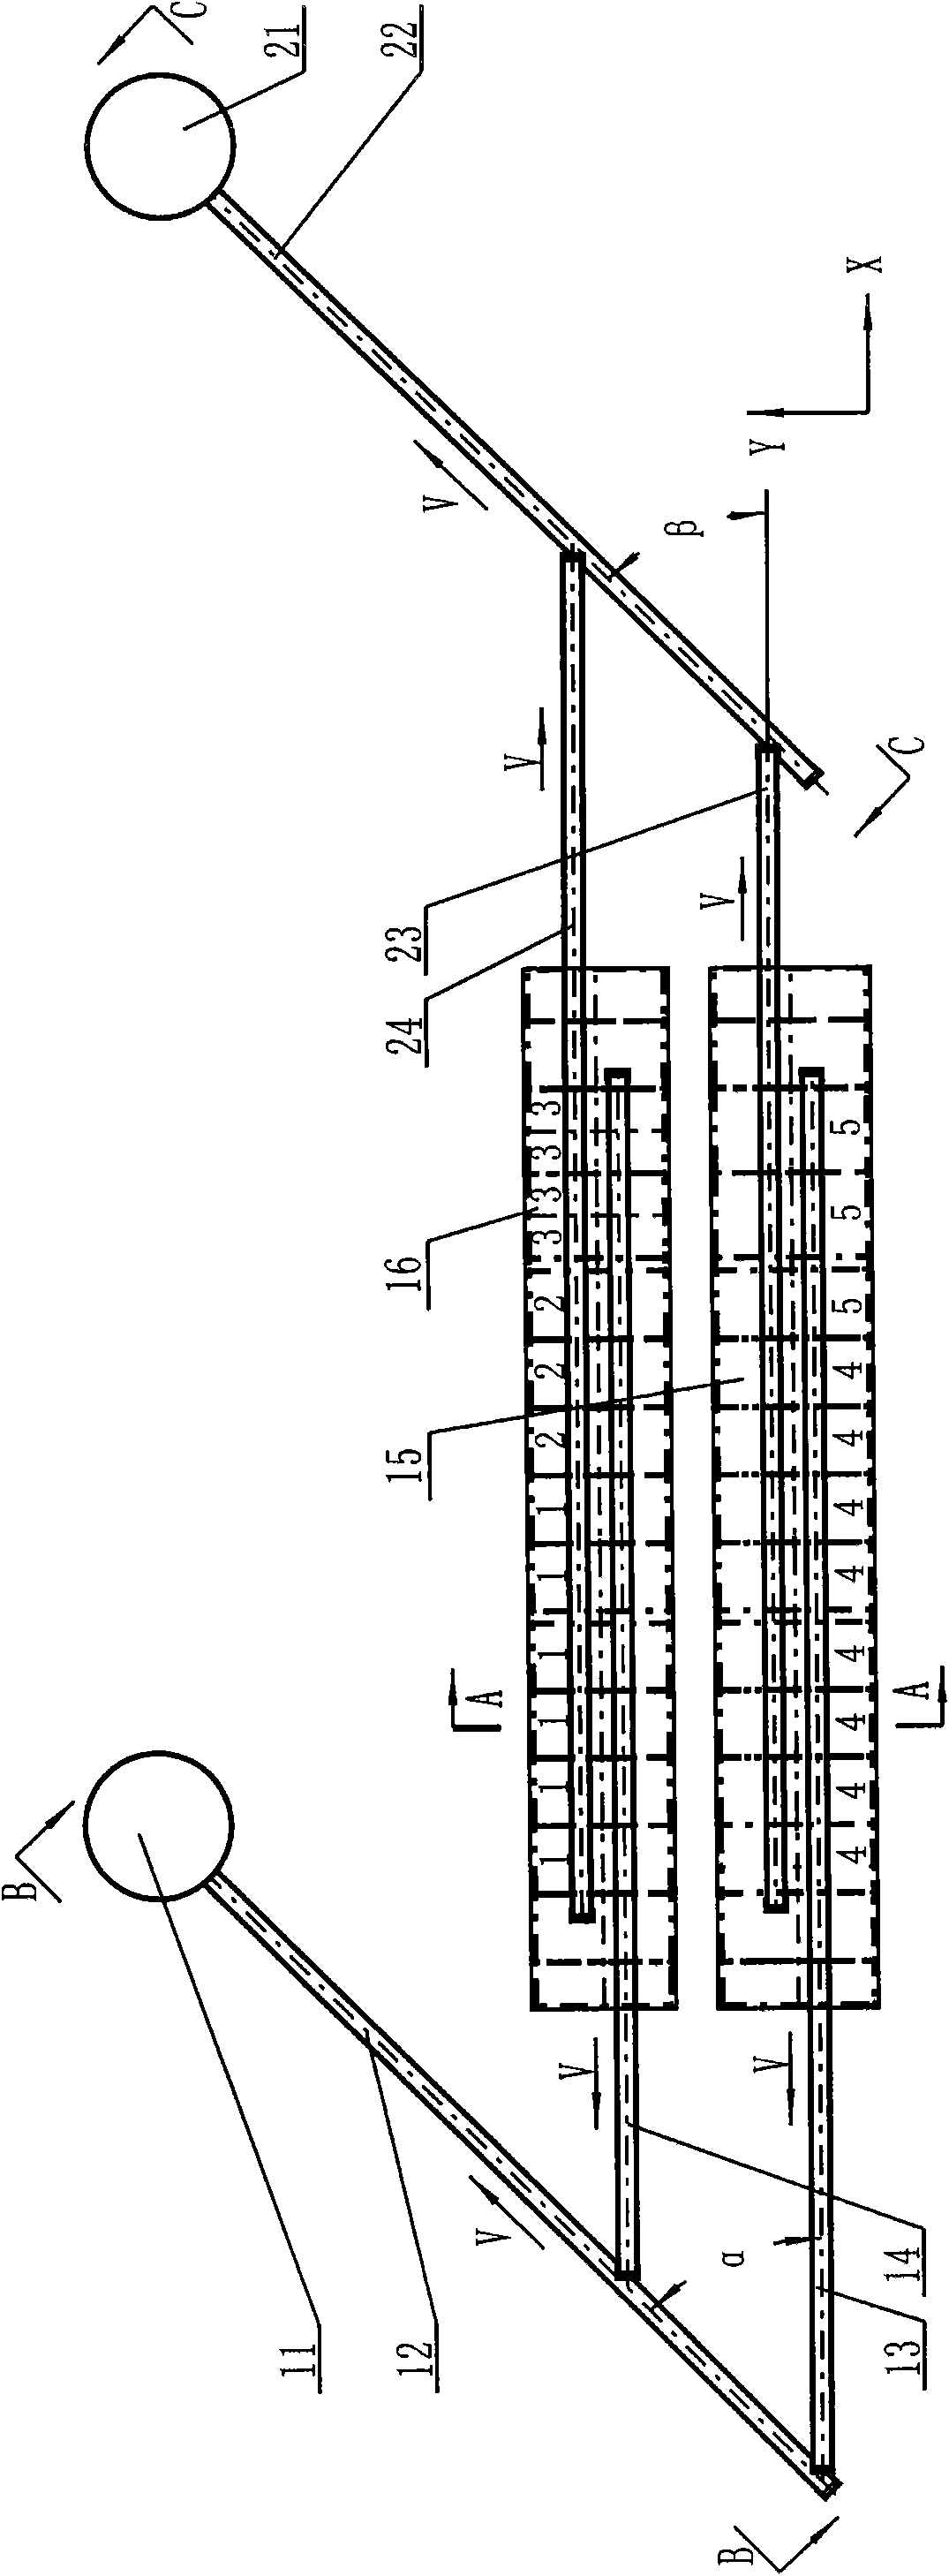 Feeding system for blast furnace ore and coke channel system